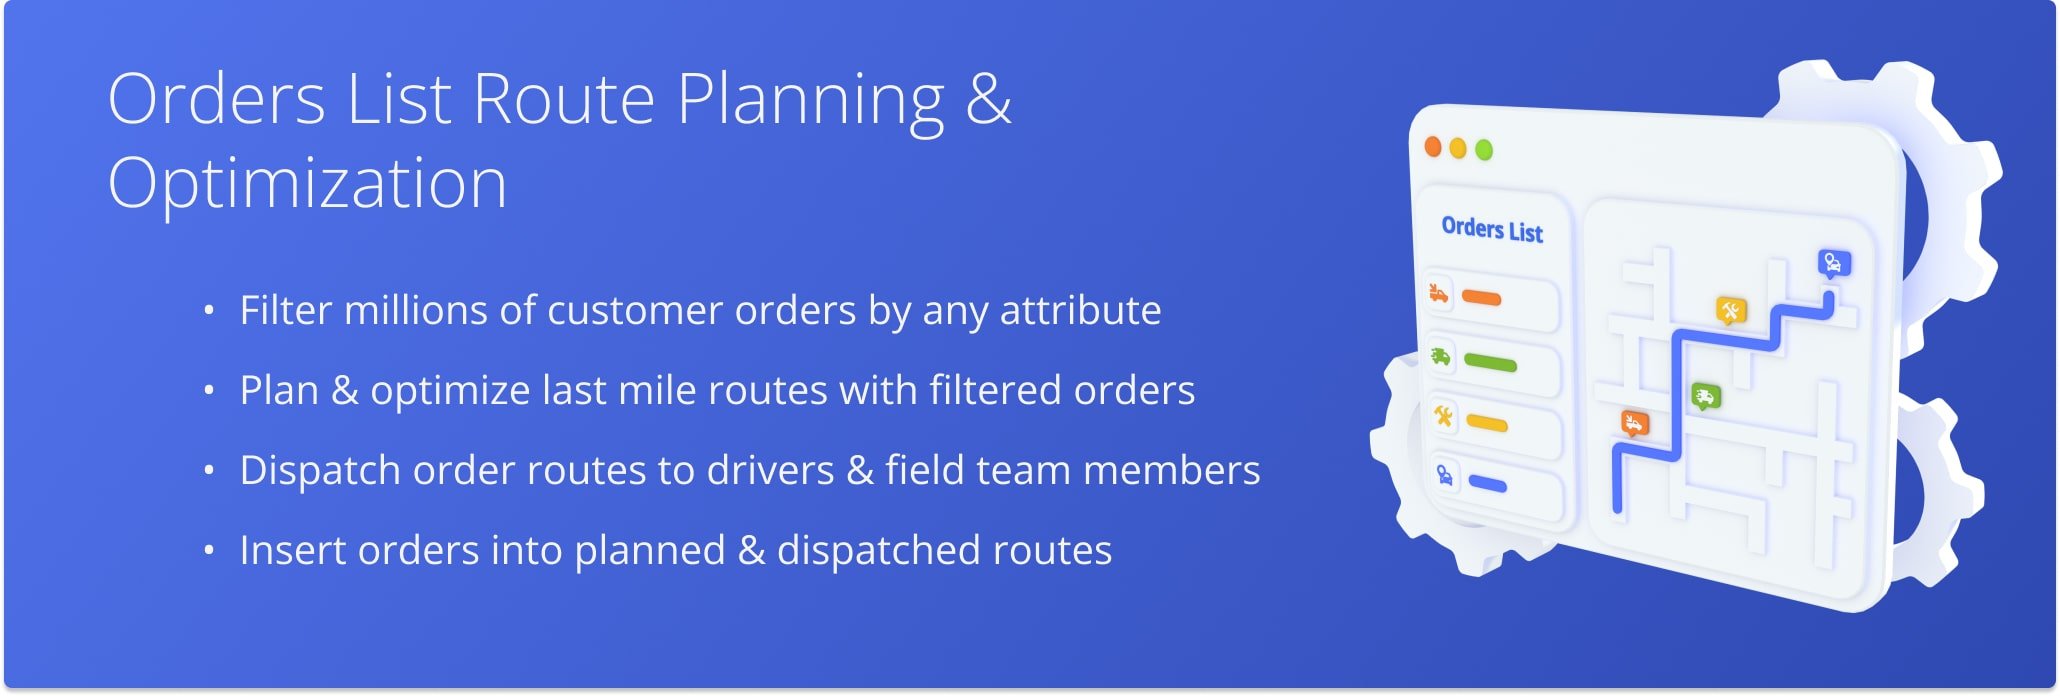 Route4Me's ERP Order Management and Routing System enables medium and large last mile businesses to easily plan routes with selected orders from the Orders List.